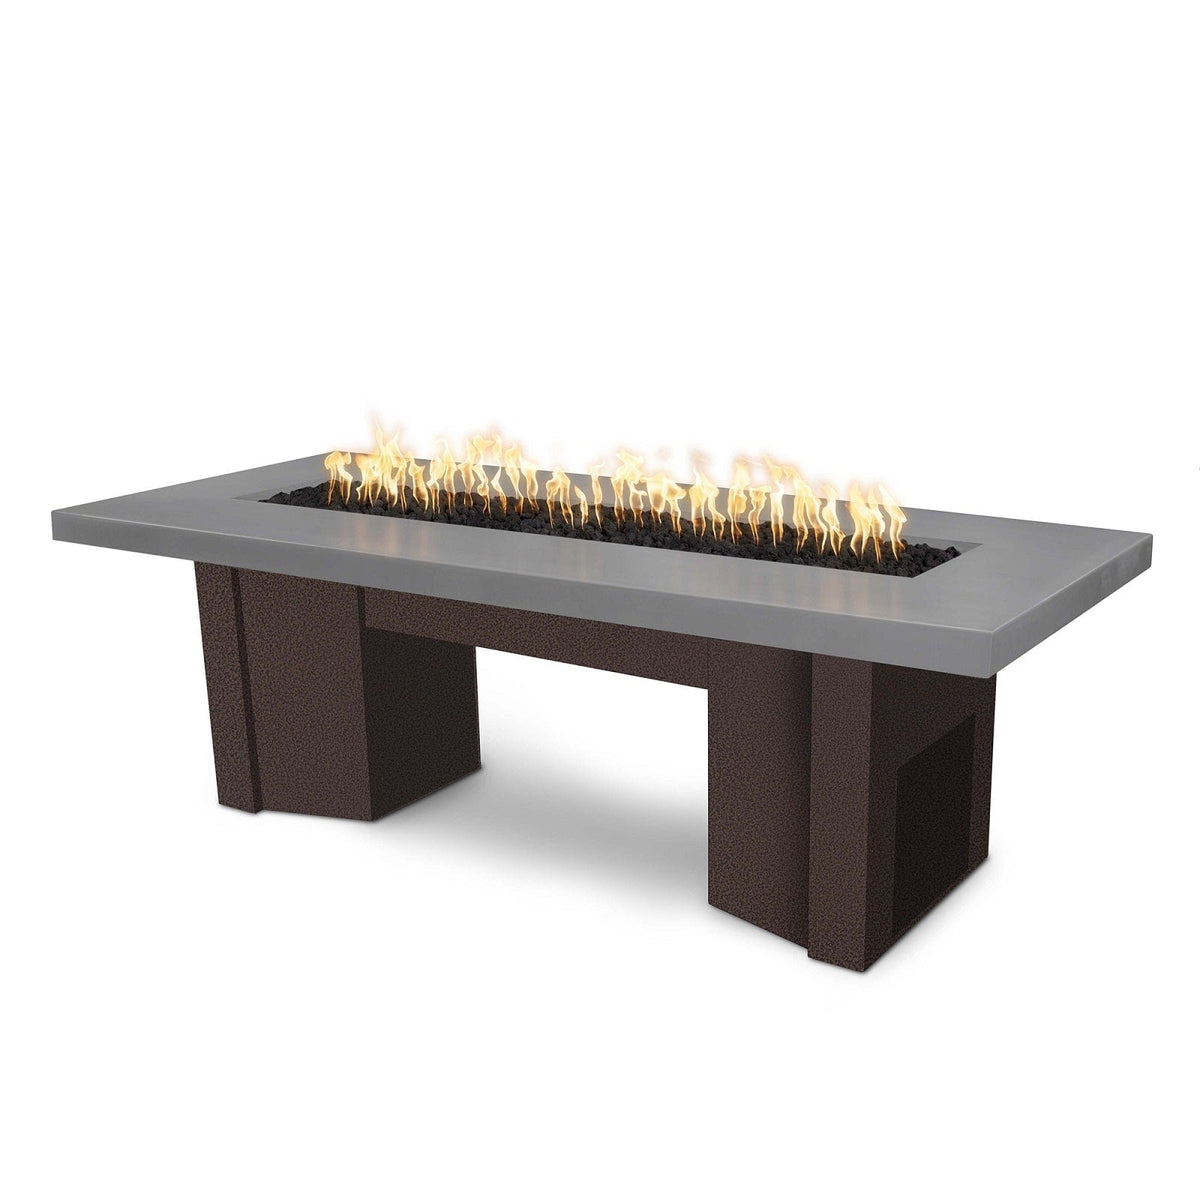 The Outdoor Plus Fire Features Natural Gray (-NGY) / Copper Vein Powder Coated Steel (-CPV) The Outdoor Plus 60&quot; Alameda Fire Table Smooth Concrete in Natural Gas - 110V Plug &amp; Play Electronic Ignition / OPT-ALMGFRC60EKIT-NG